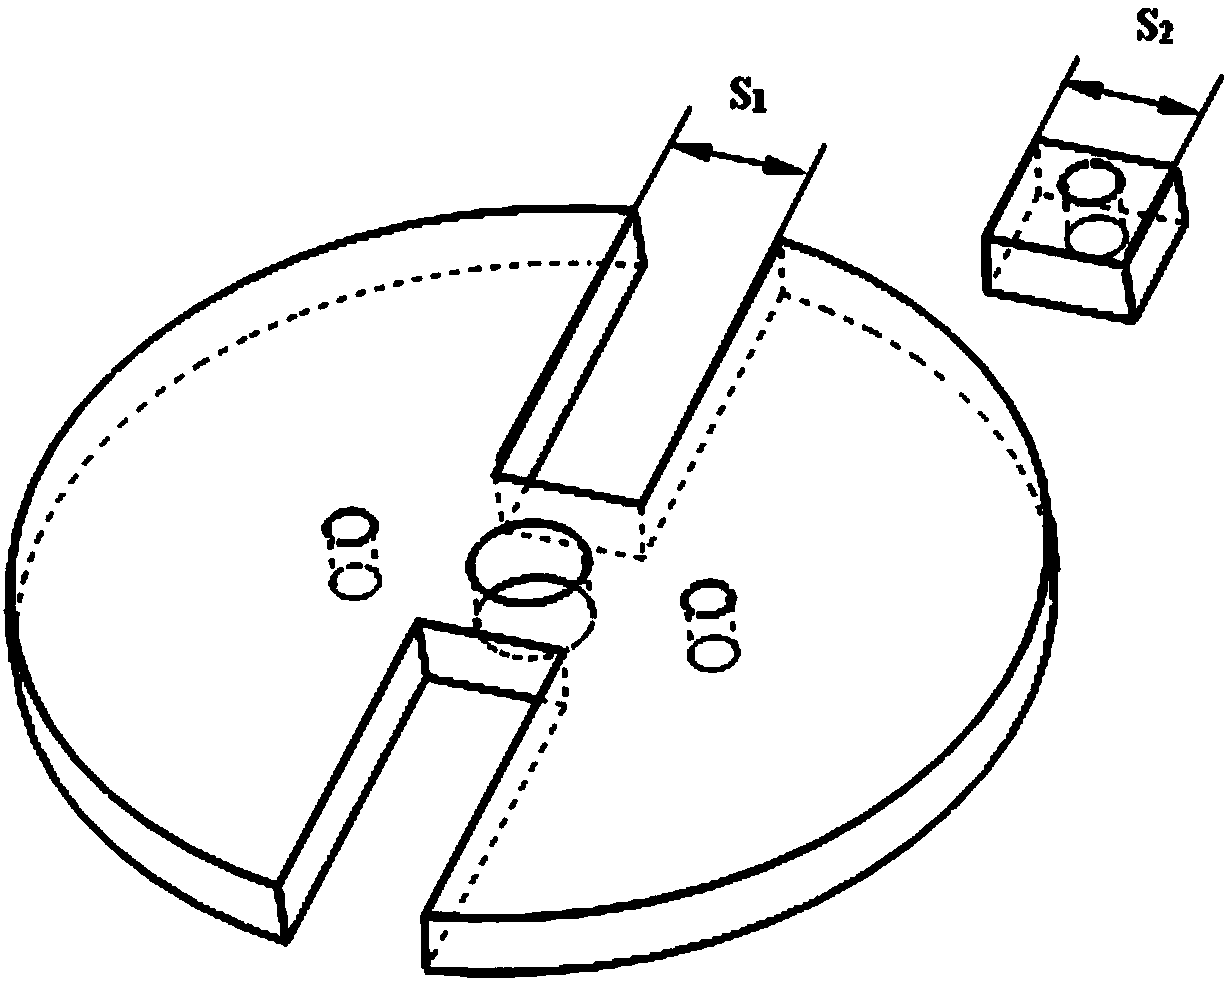 Clamp for difficult-to-machine material turning surface observing and turning experimental method